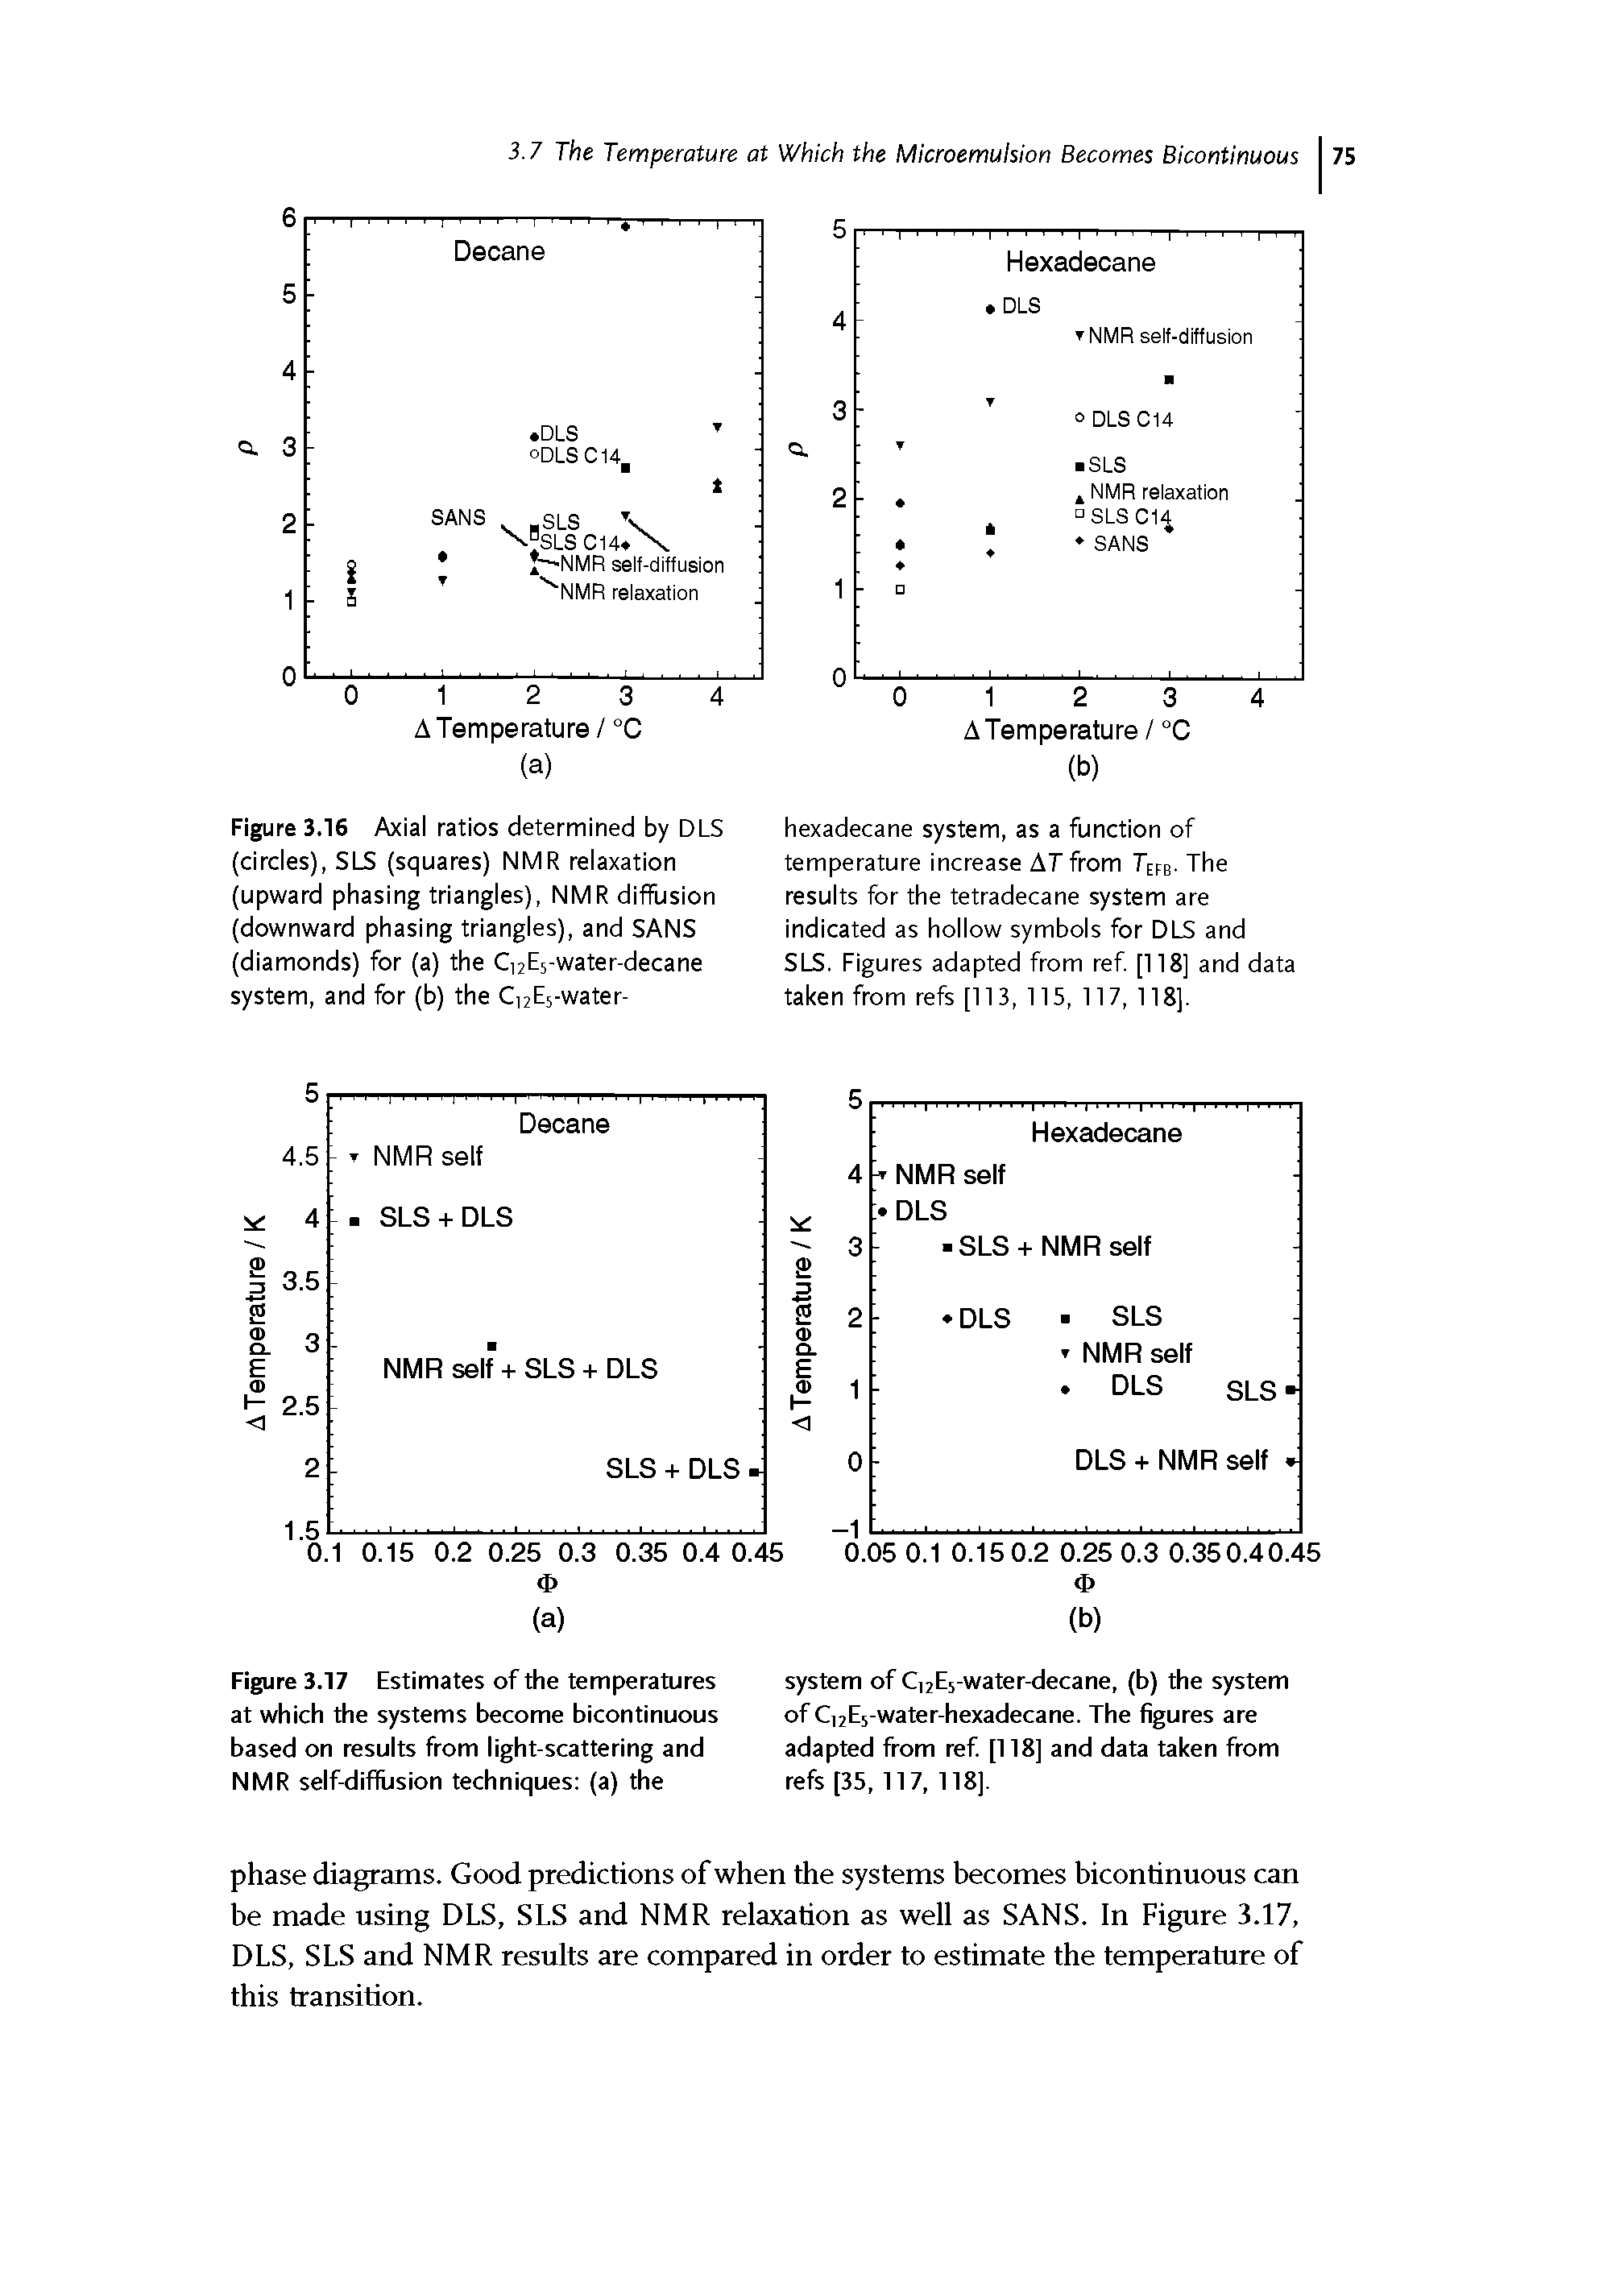 Figure 3.17 Estimates of the temperatures at which the systems become bicontinuous based on results from light-scattering and NMR self-diffusion techniques (a) the...